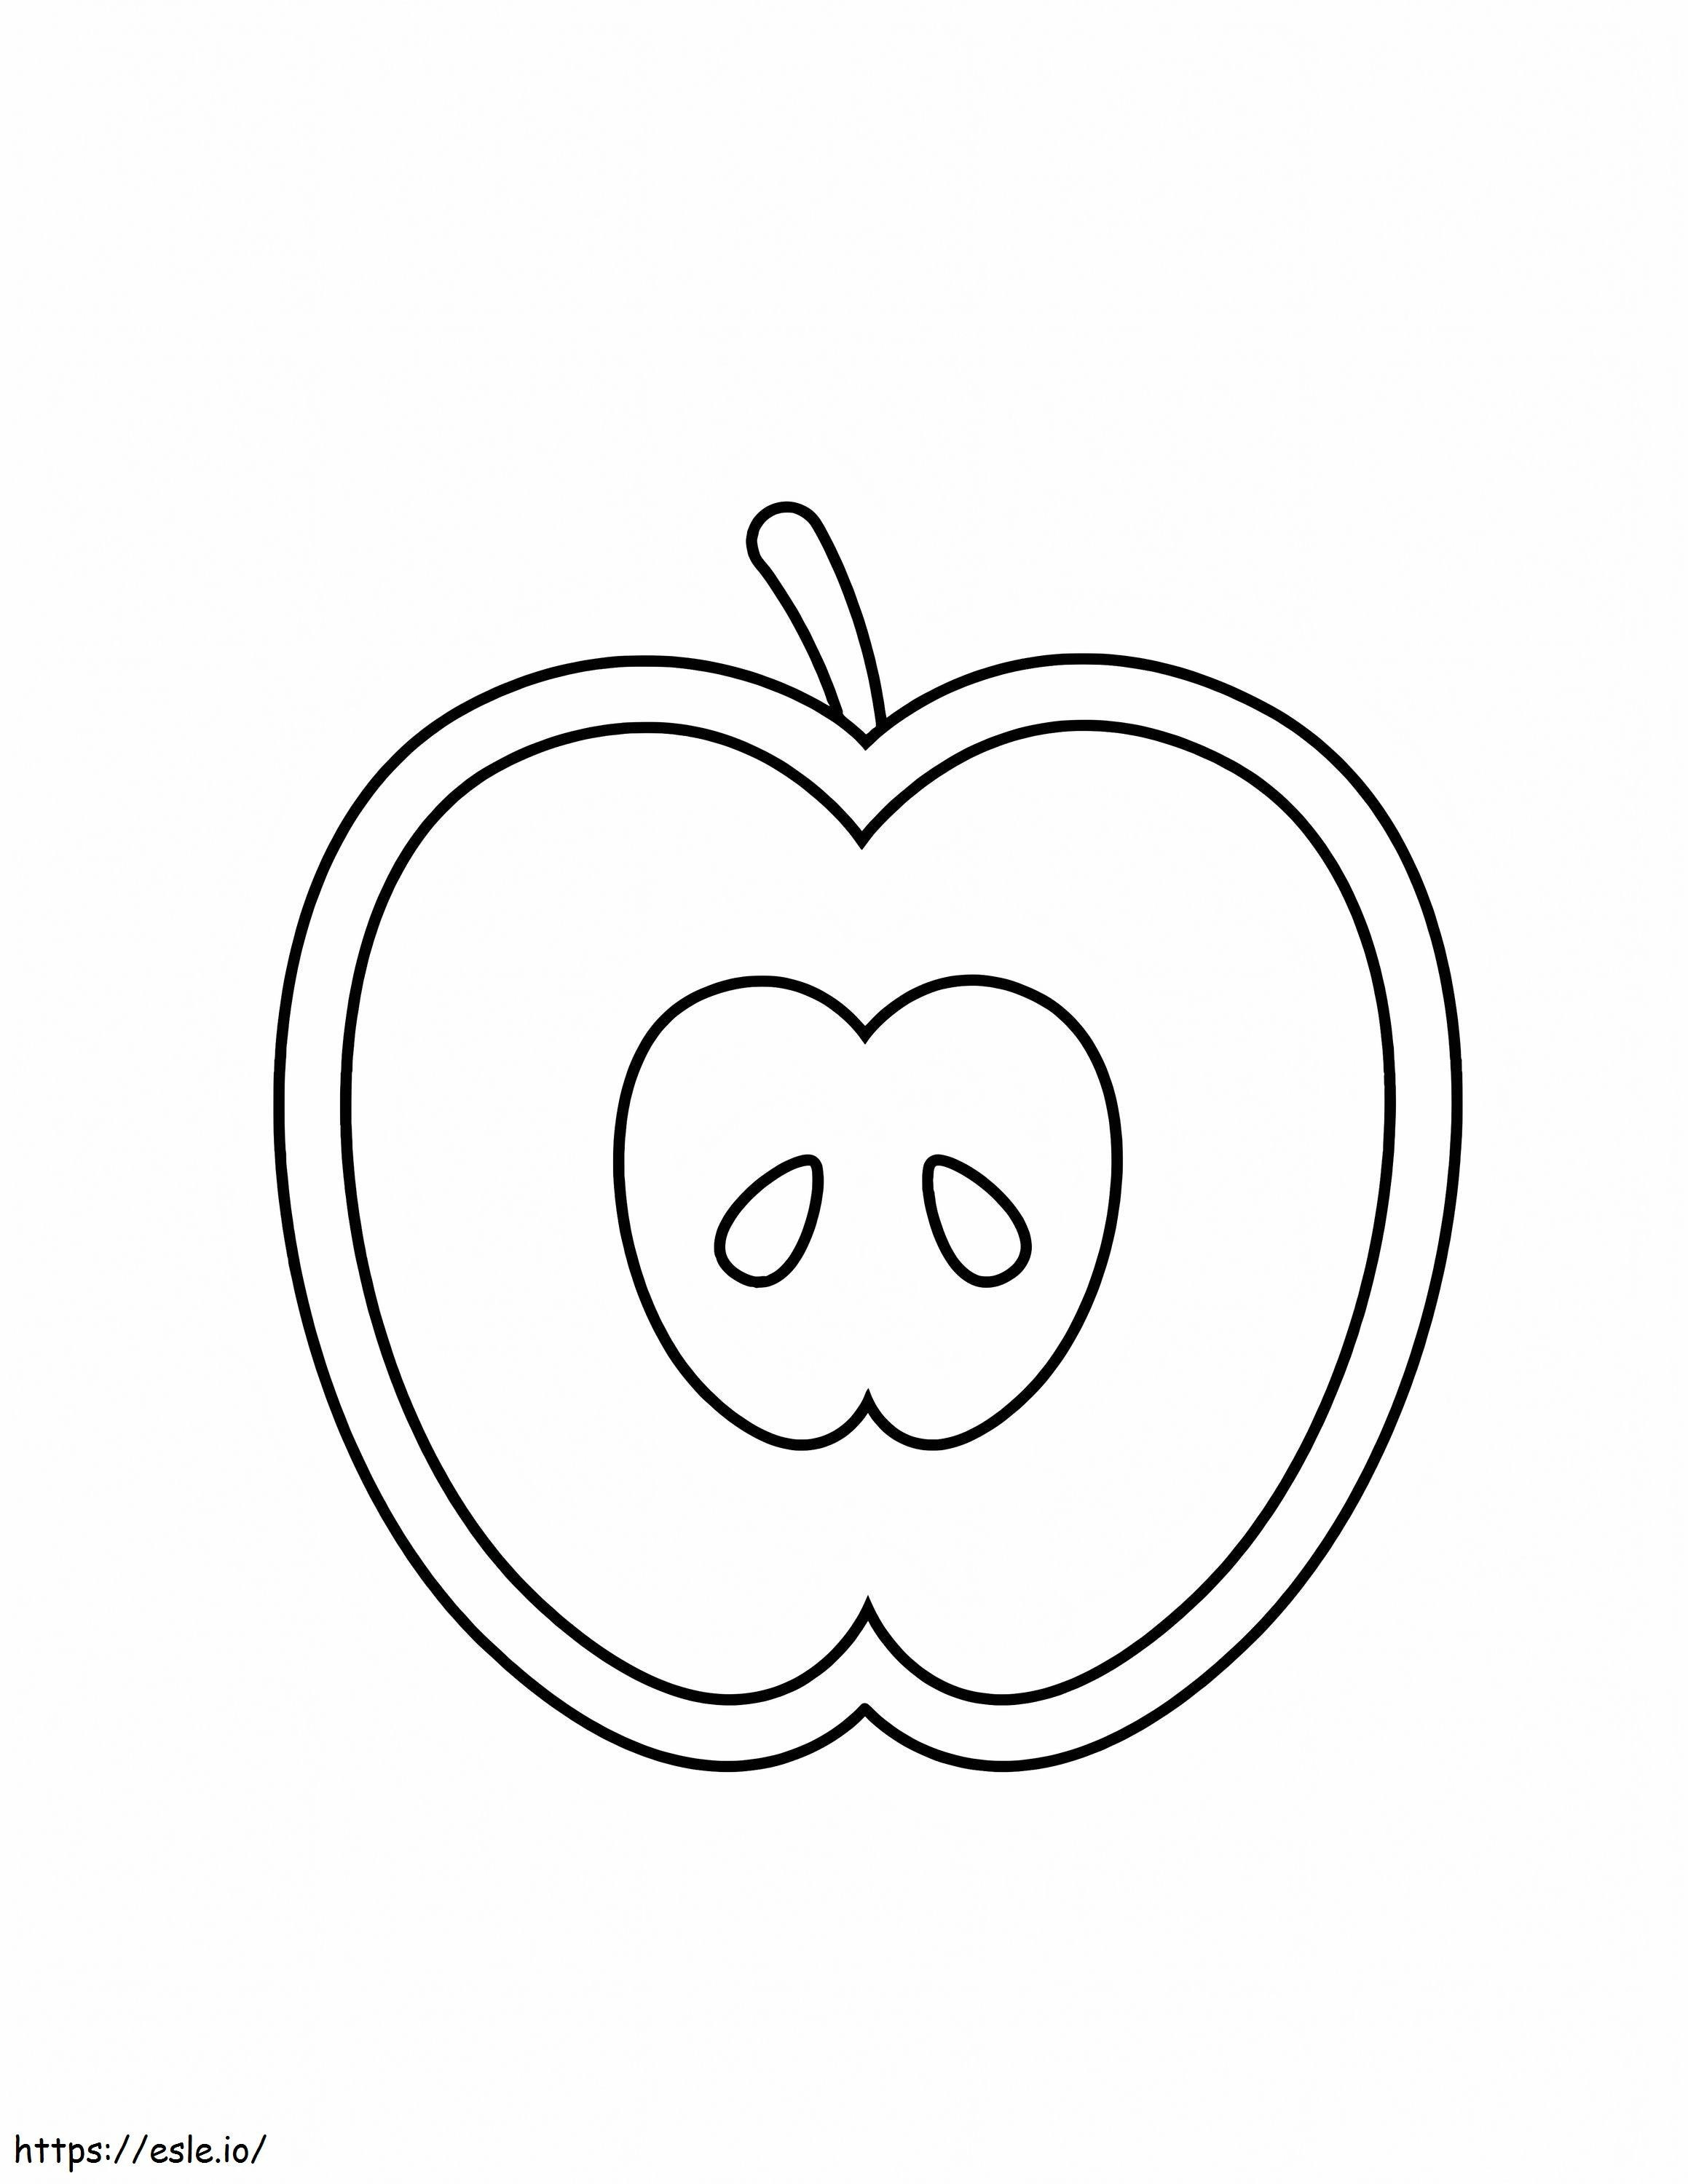 Apple Sticker coloring page